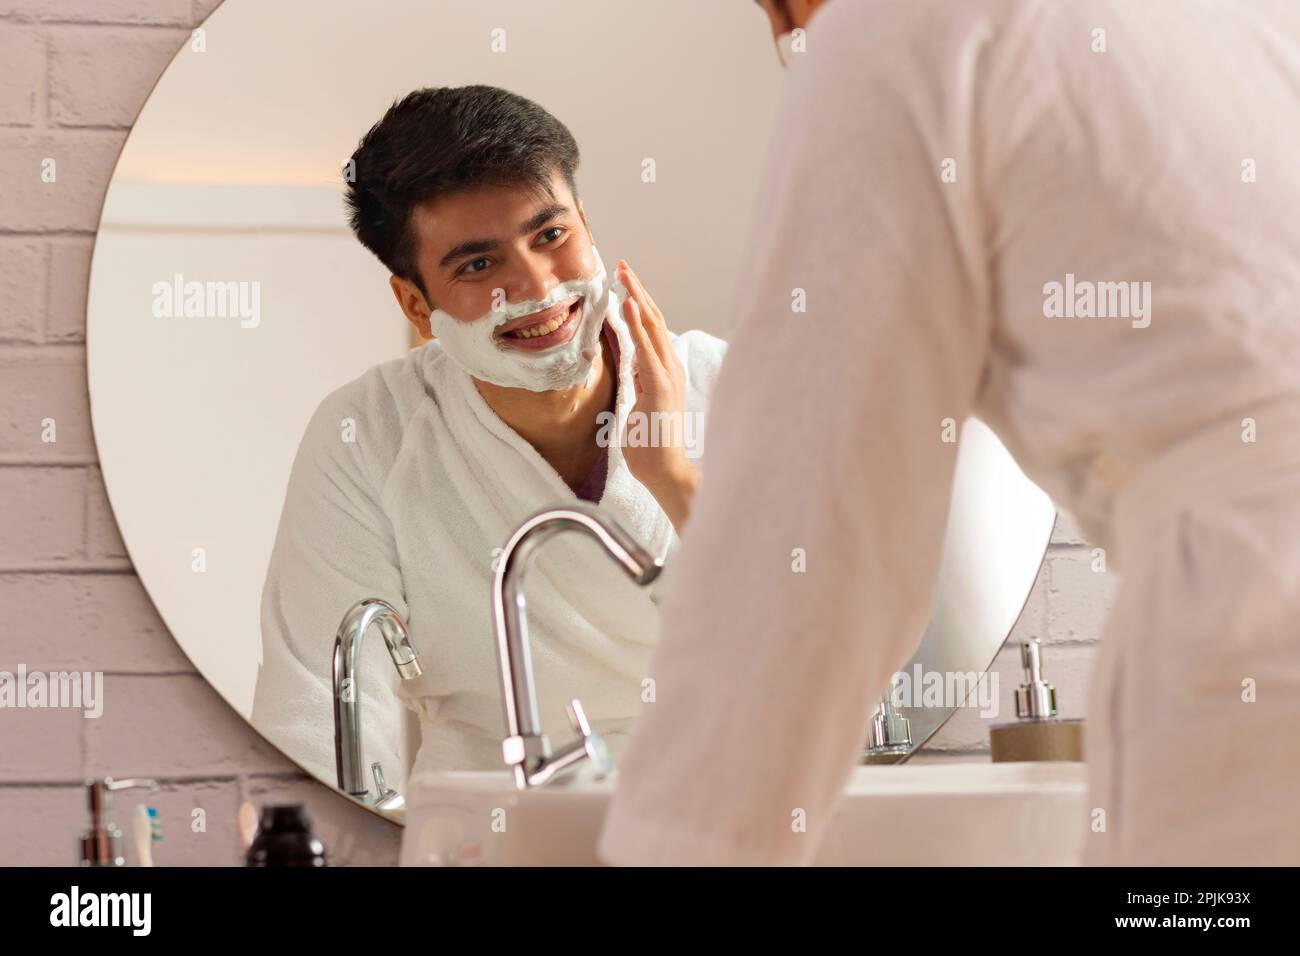 Young man applying shaving cream to his face in a bathroom at home Stock Photo